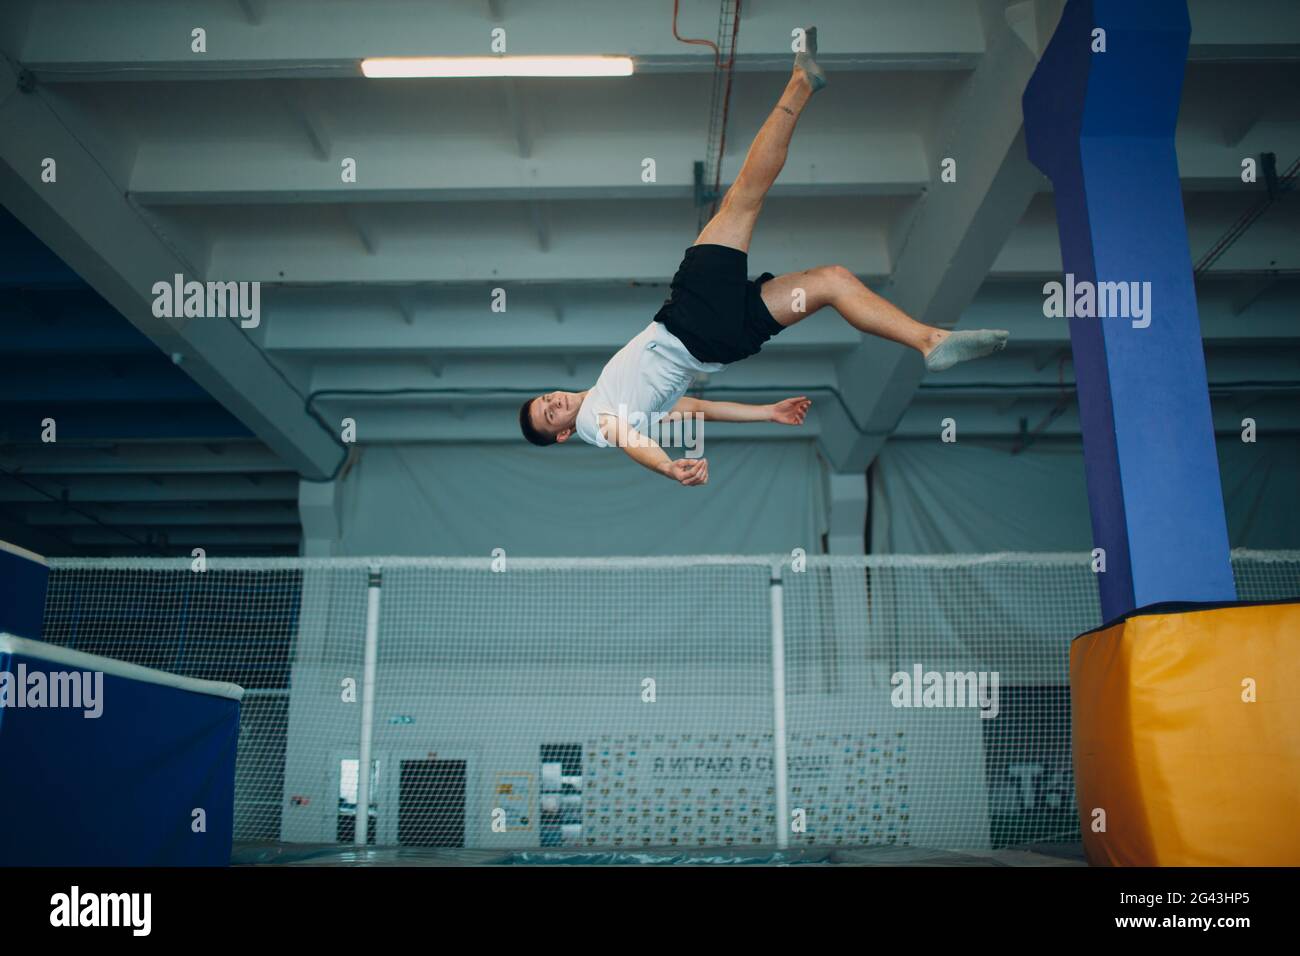 Young man acrobat jumping on trampoline indoor. Stock Photo